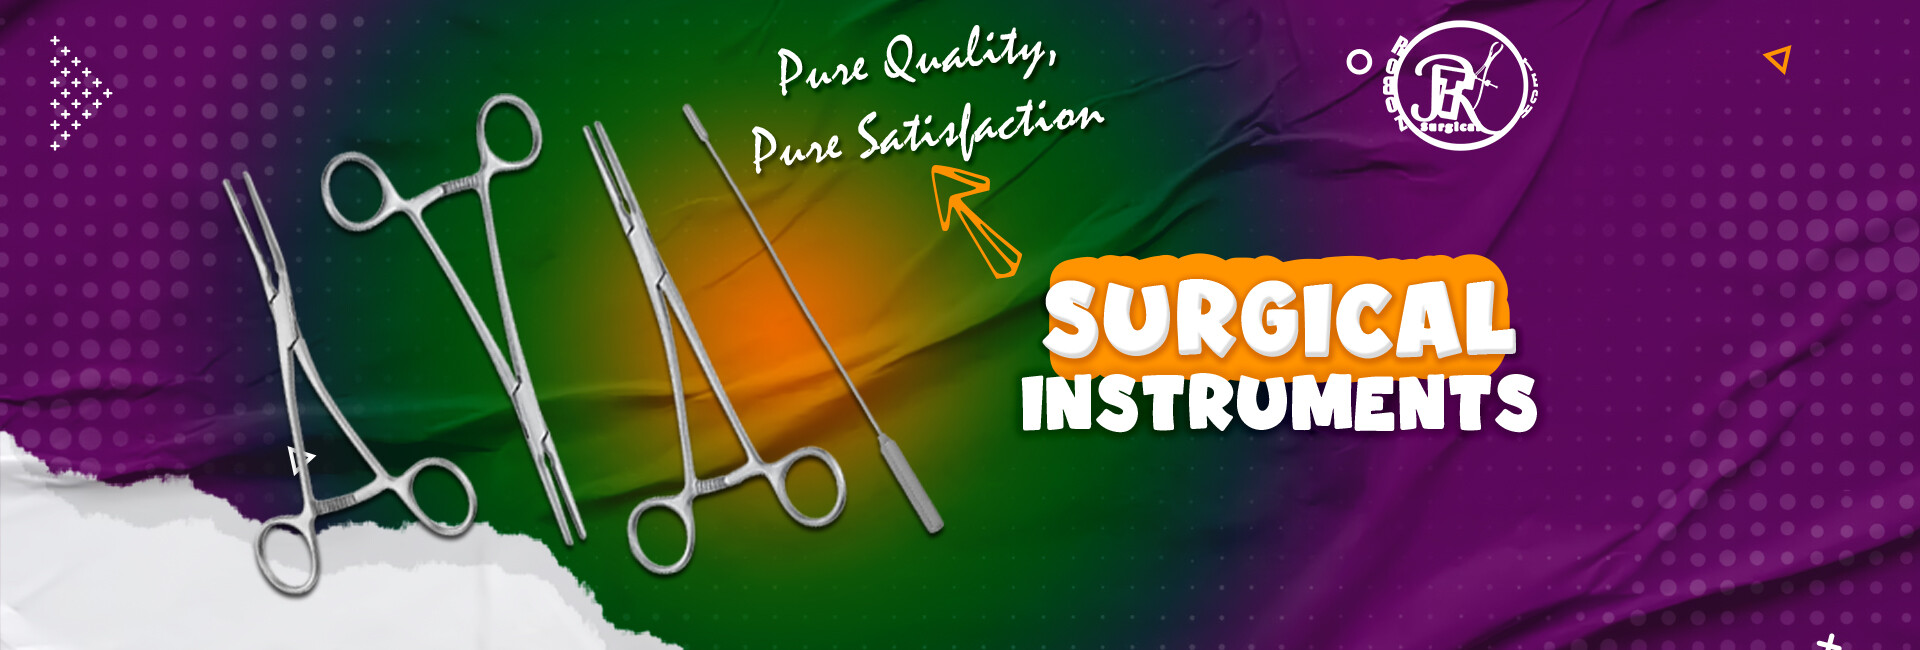 surgical psd